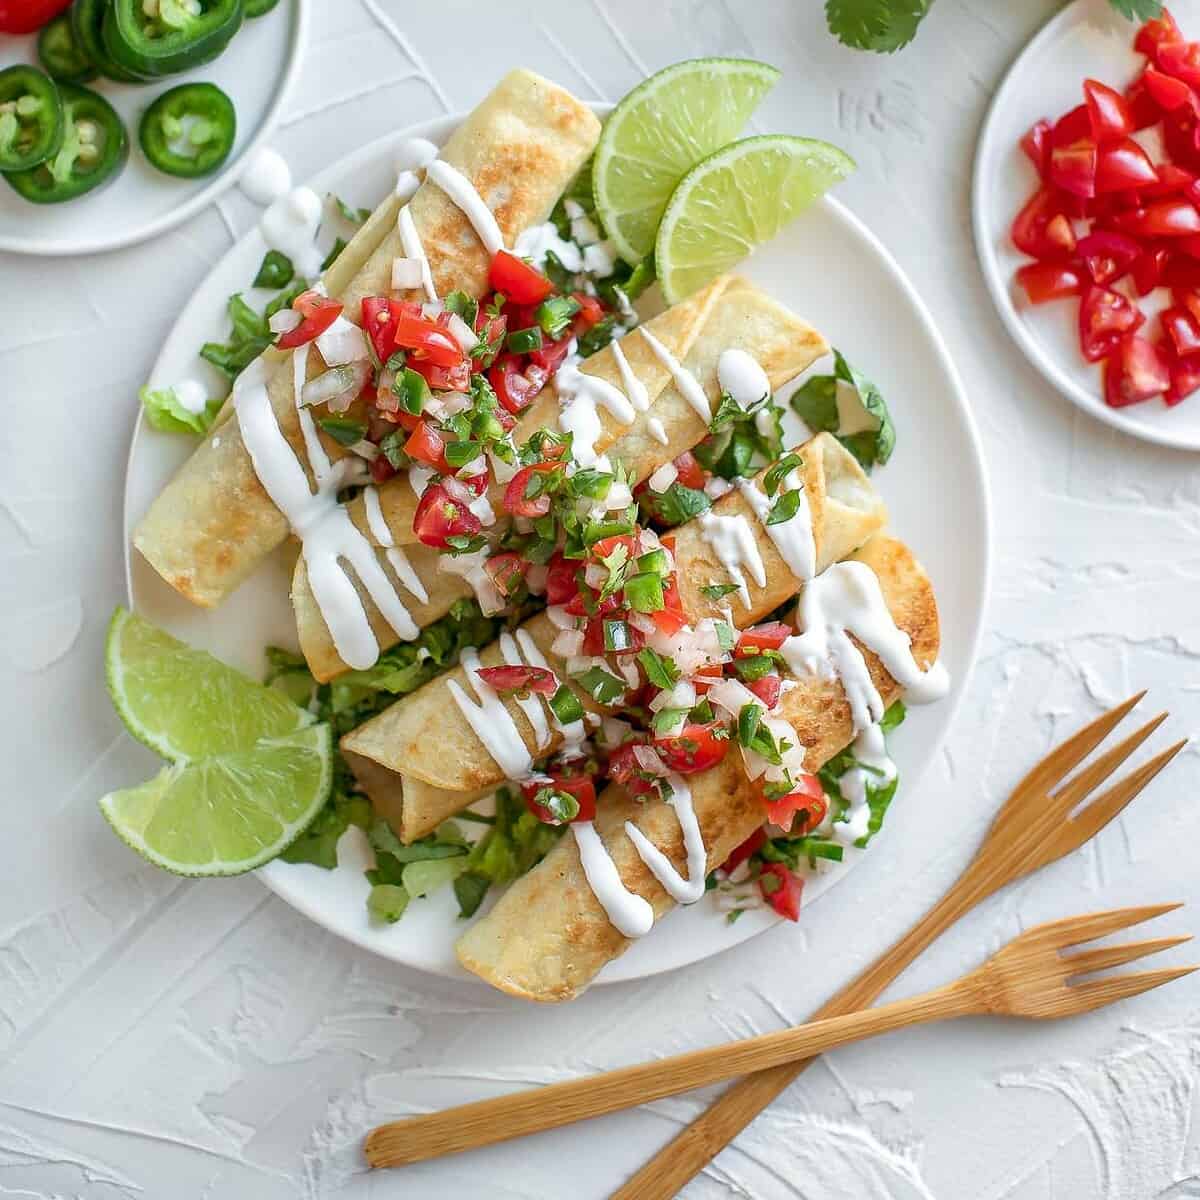  These vegetarian taquitos are the perfect bite-sized snack for any occasion!